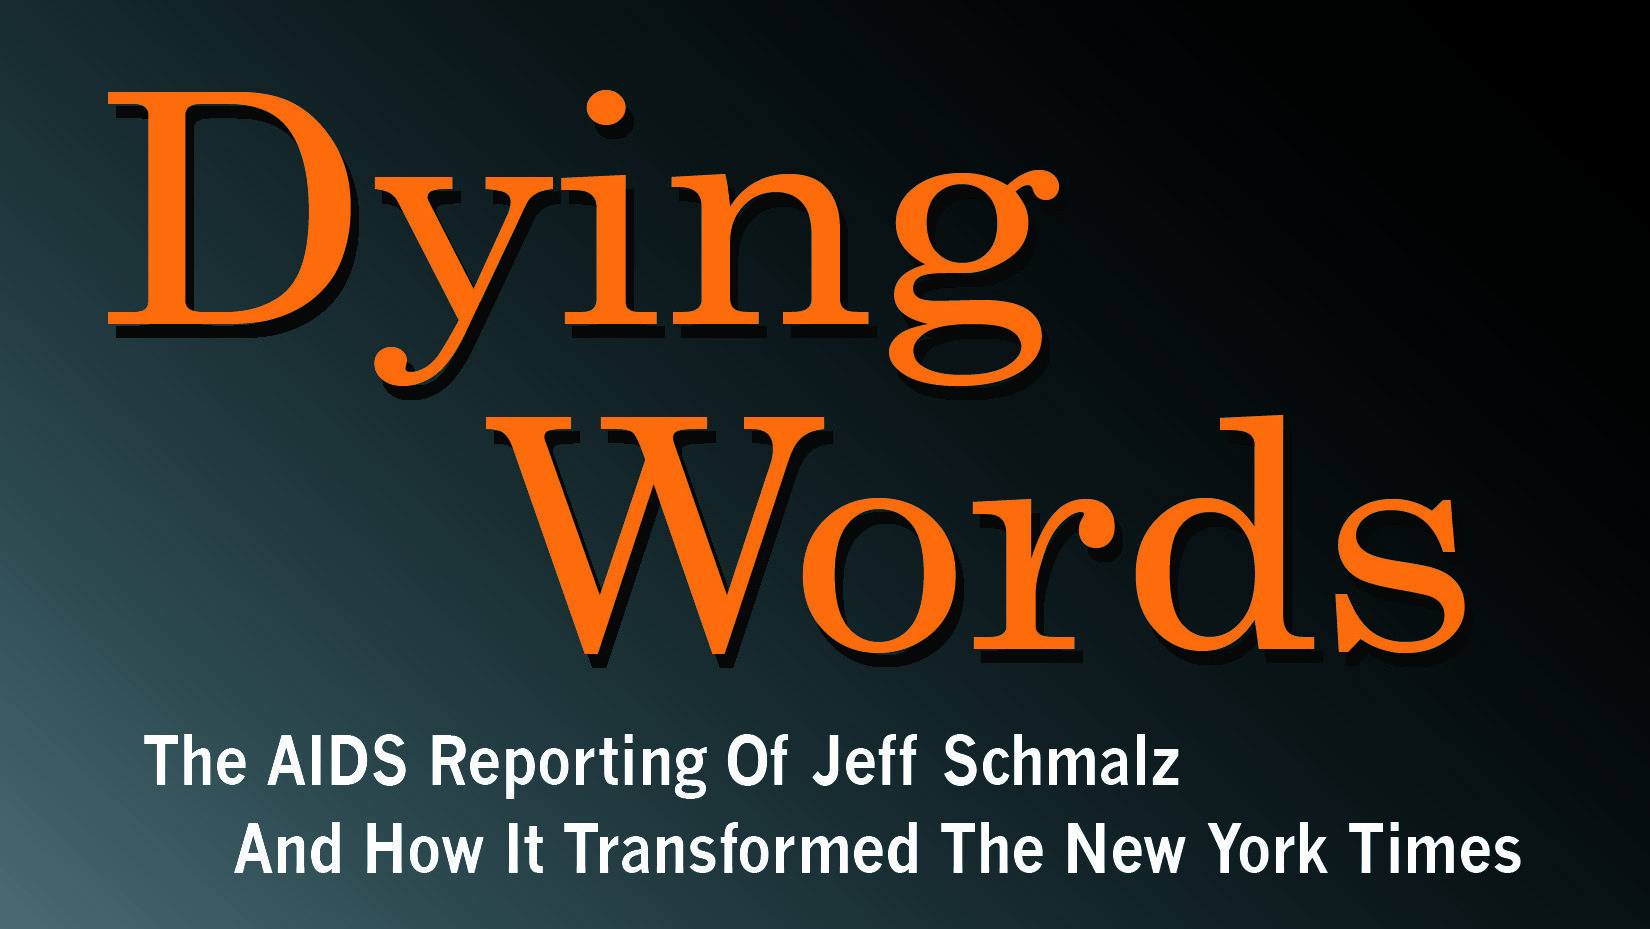 ‘Dying Words: The AIDS Reporting of Jeff Schmalz and How it Transformed The New York Times’ by Samuel G. Freedman with Kerry Donahue image